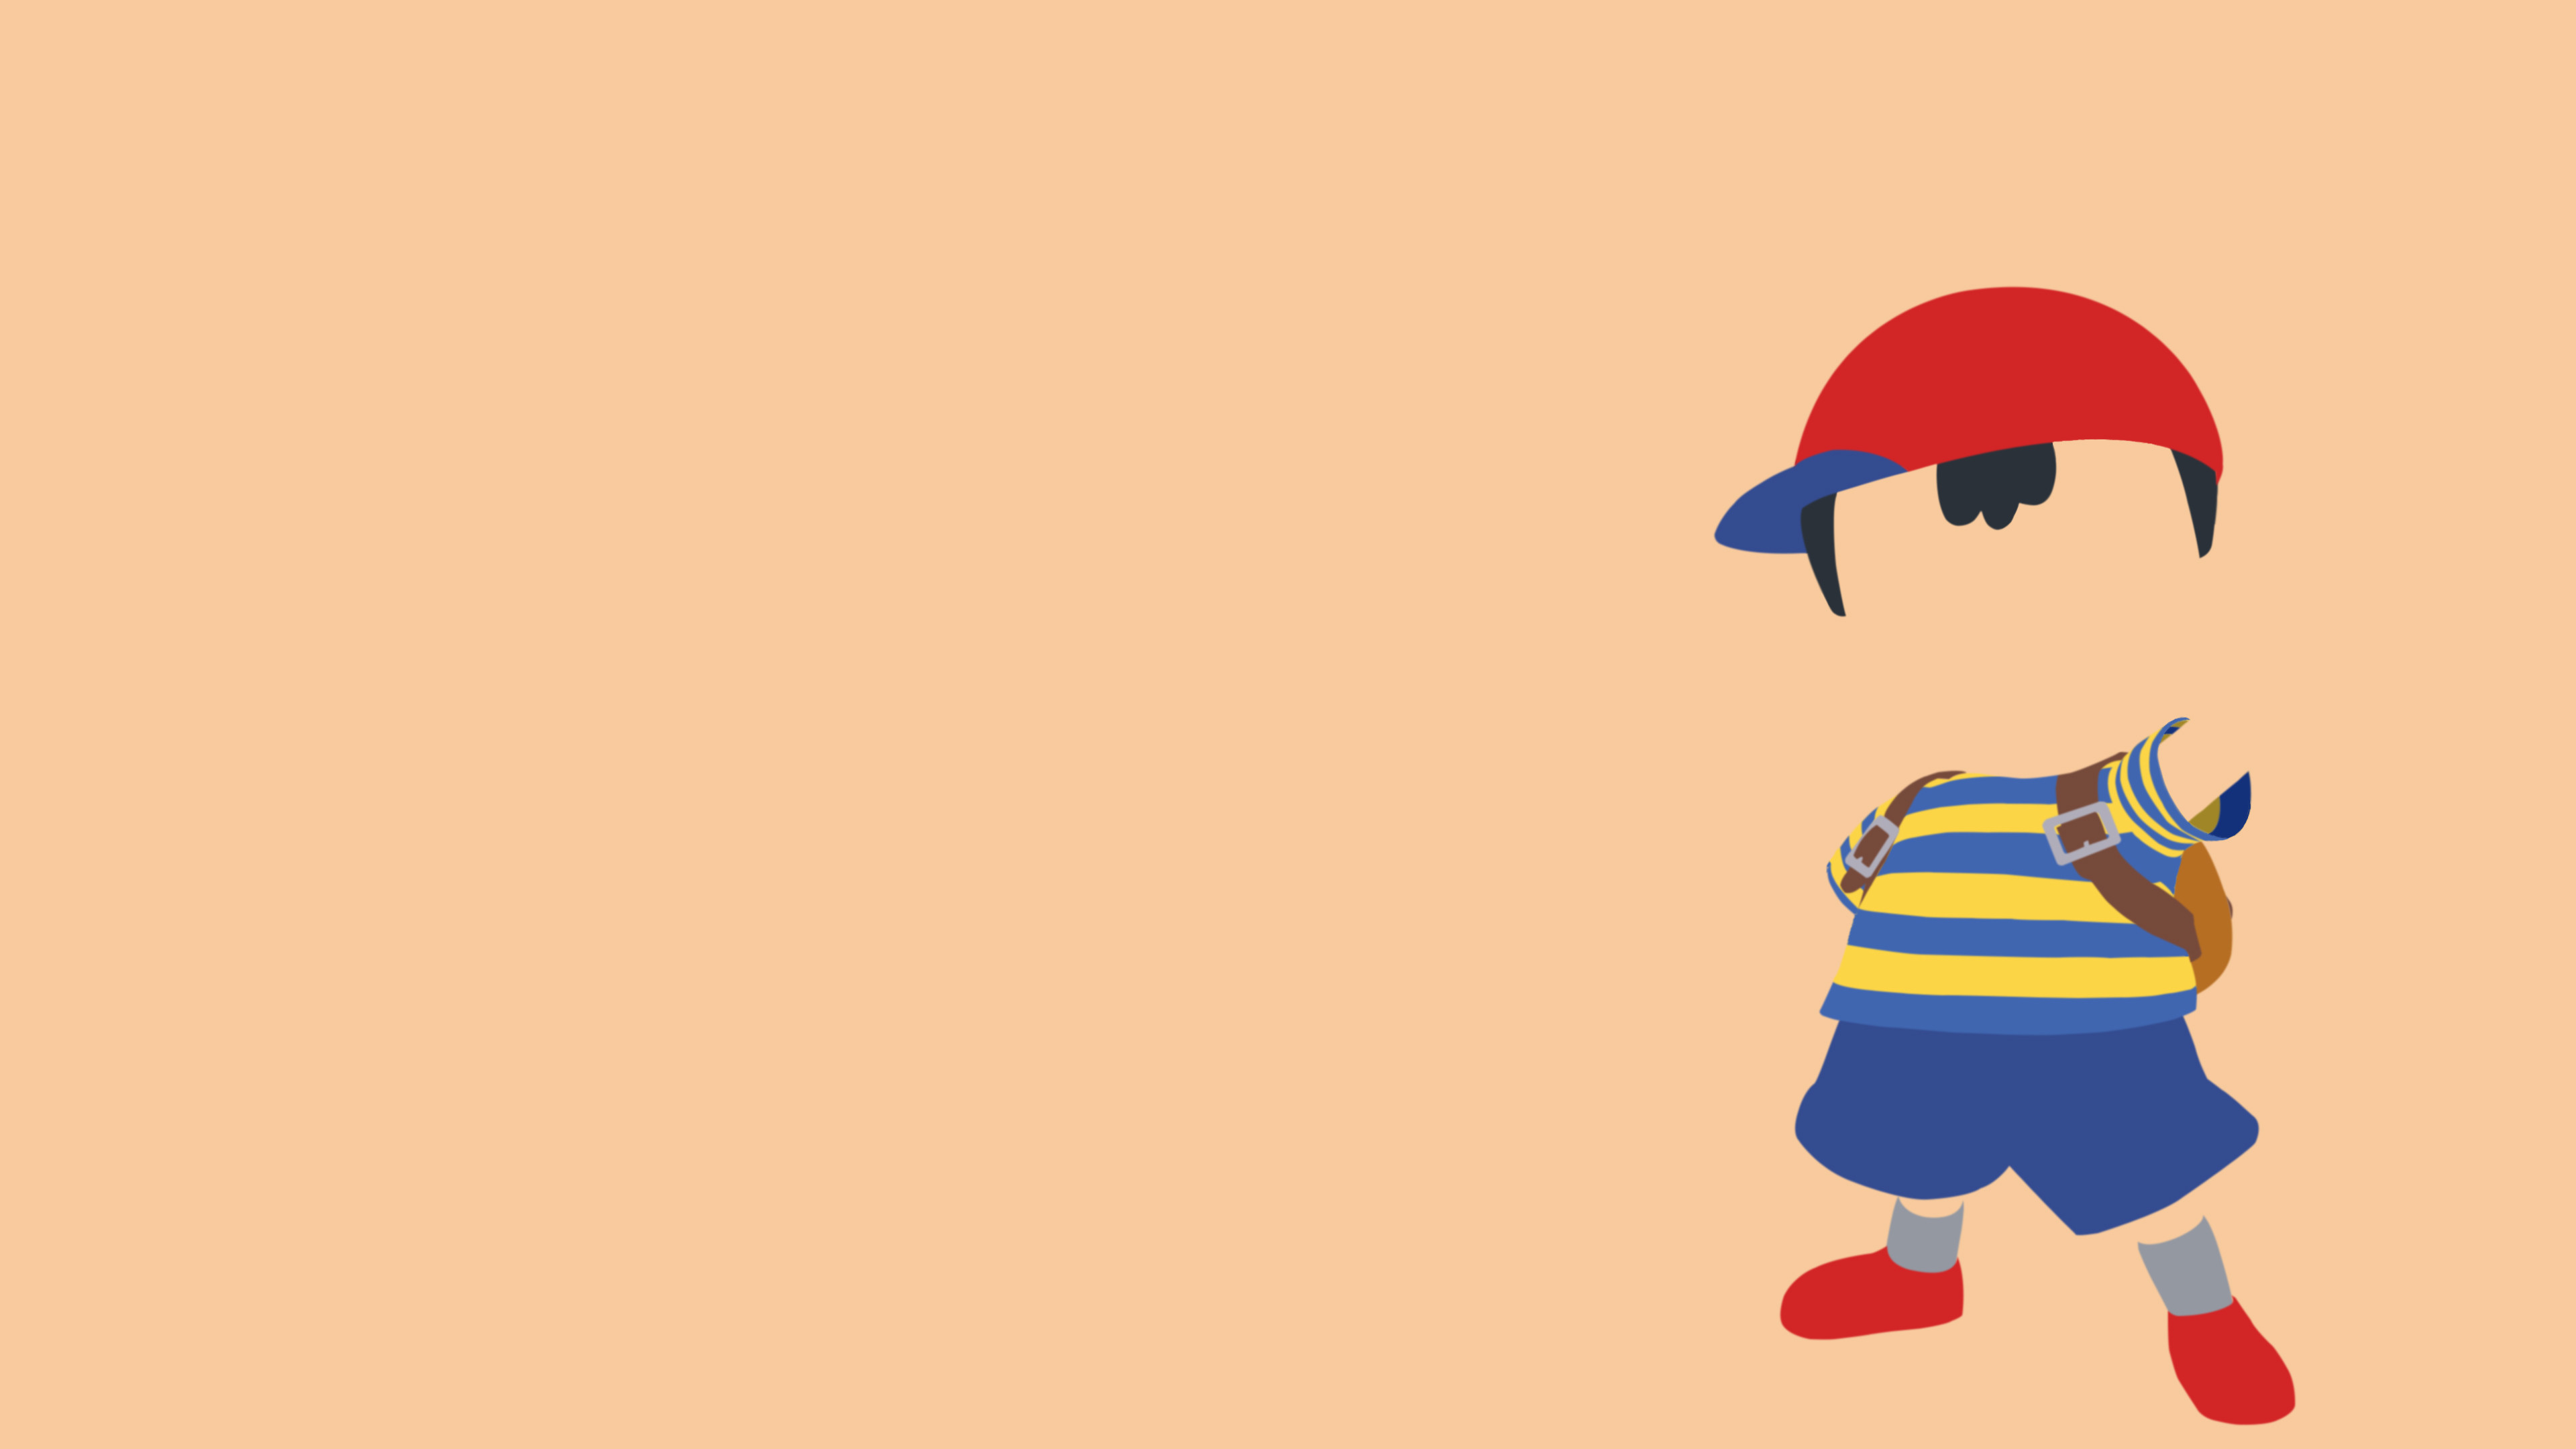 3840x2160 ... Ness - Earthbound/Mother2 minimalist wallpaper by LeadNash